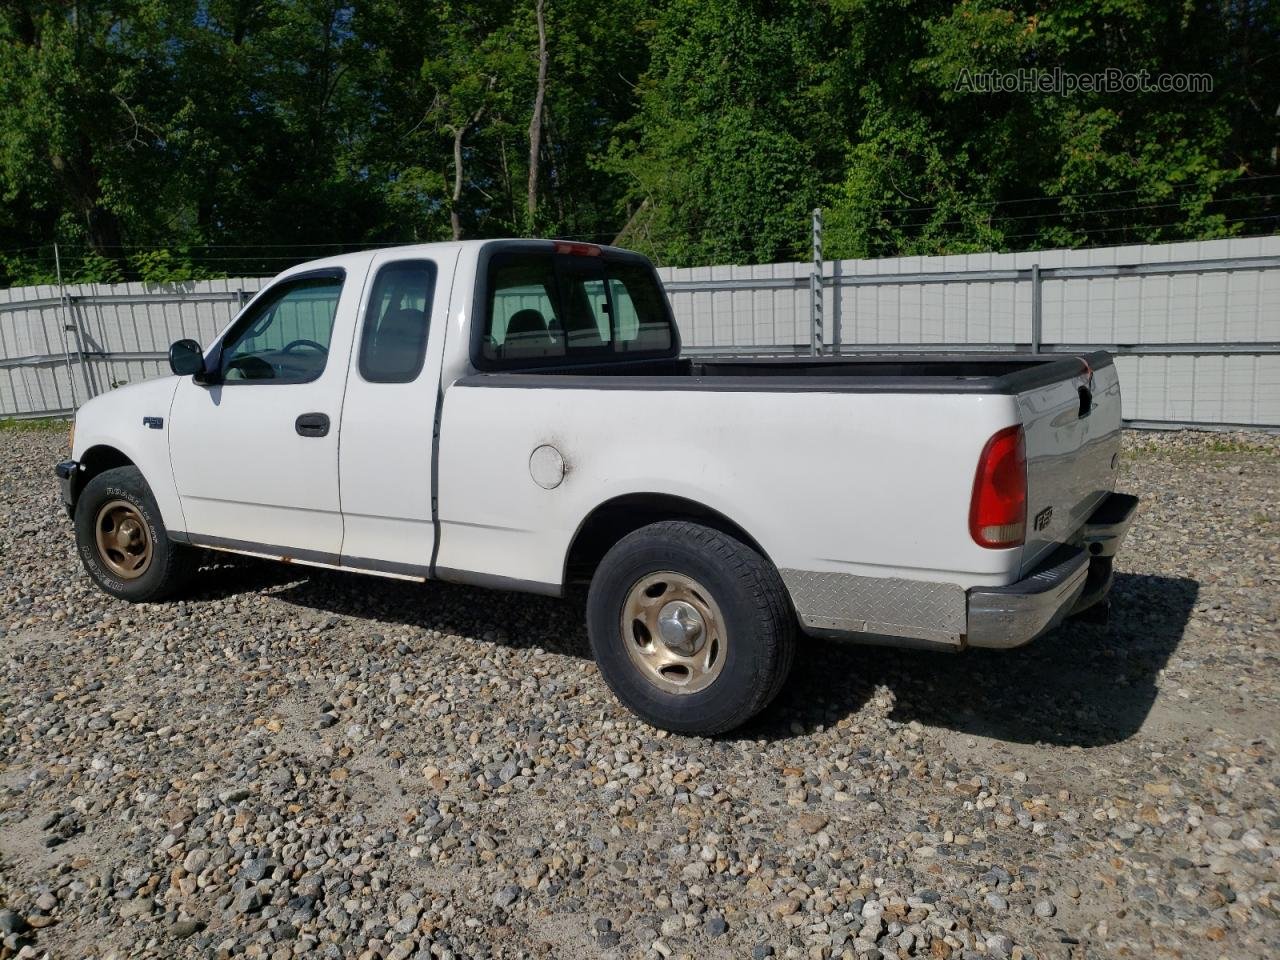 2001 Ford F150  White vin: 1FTZX17241NB50682